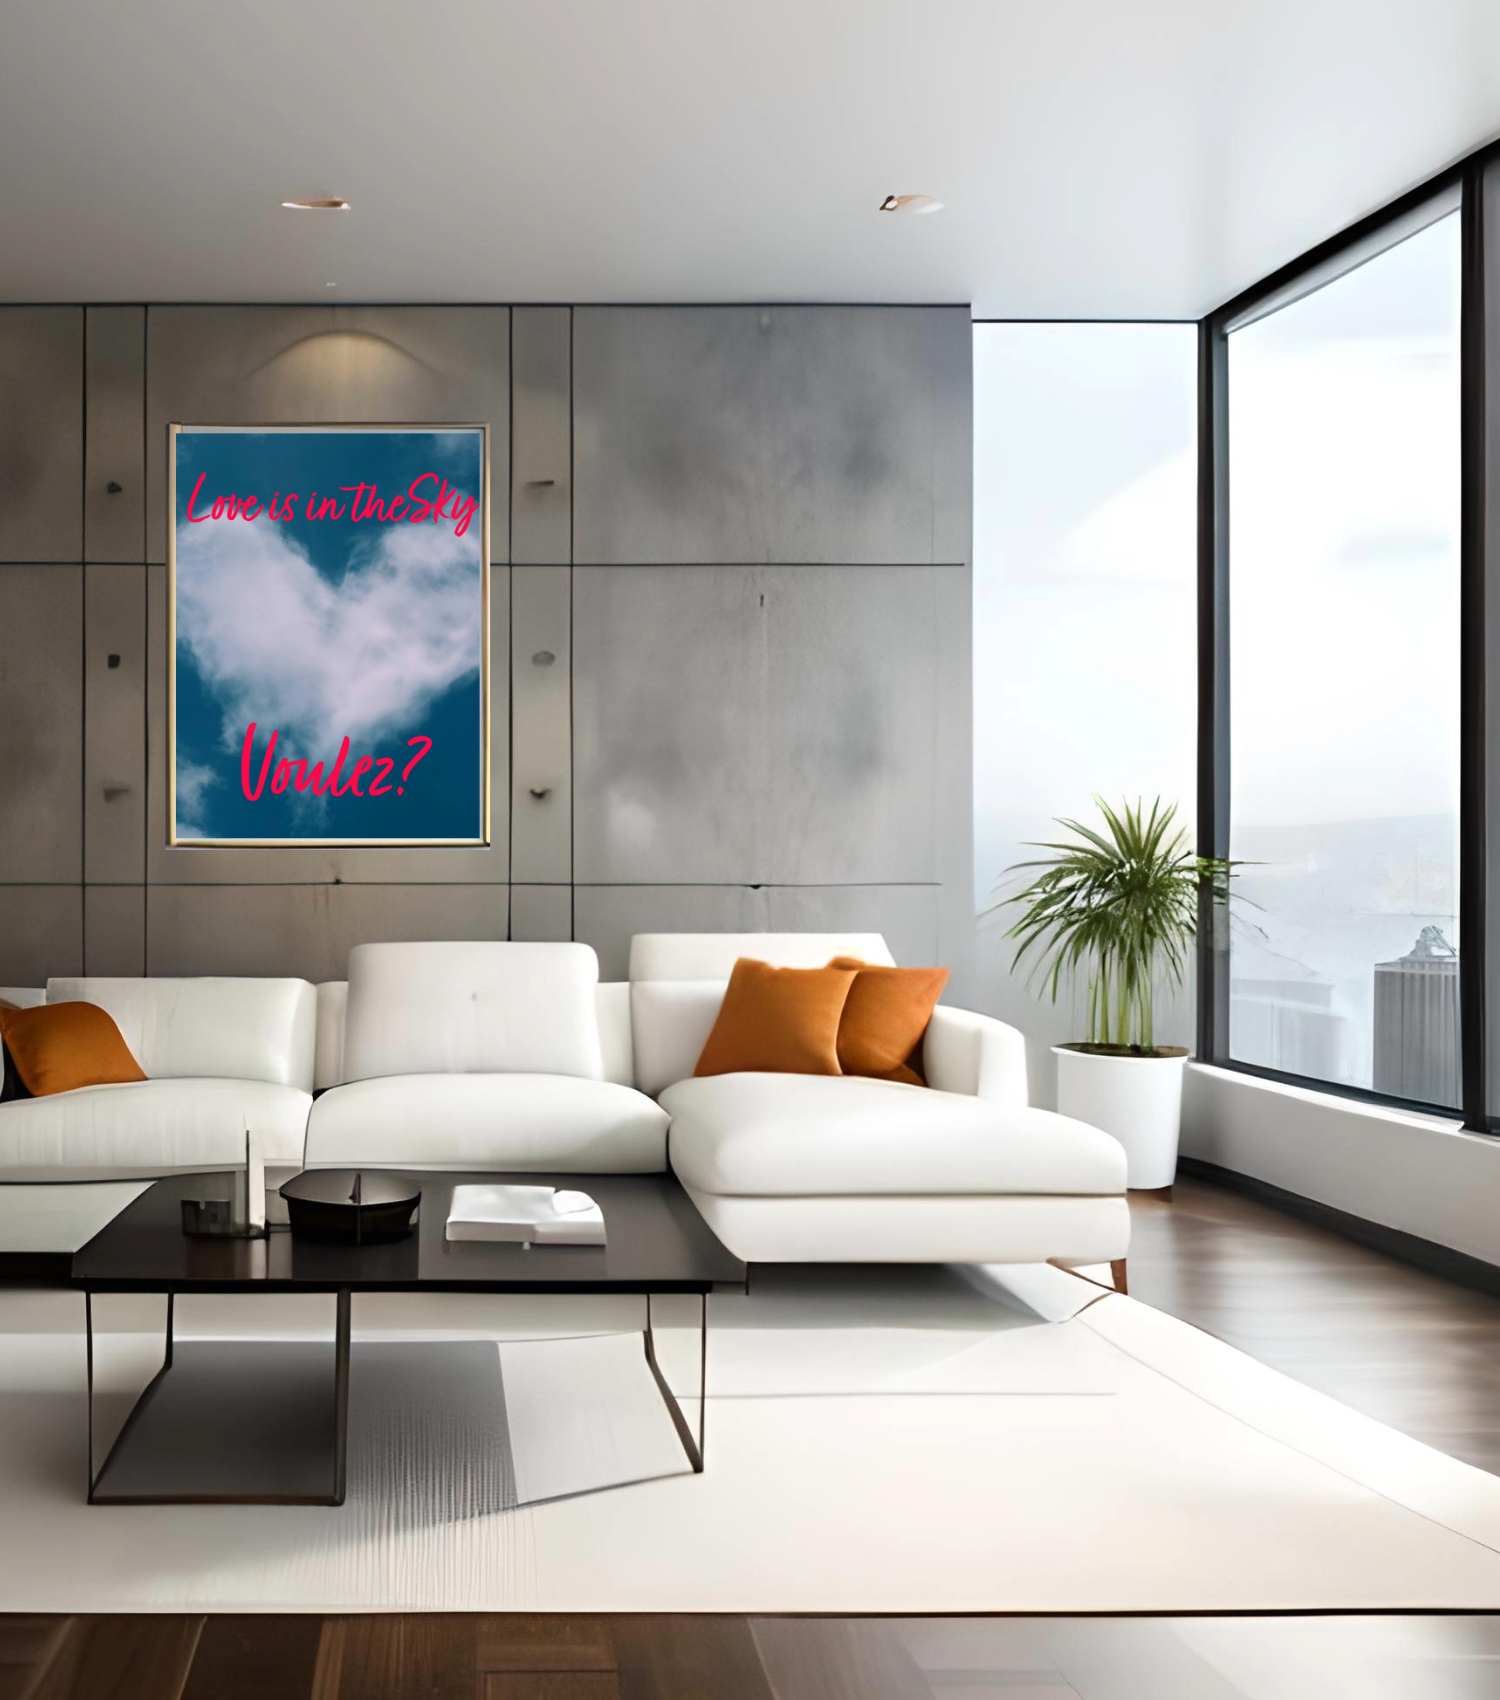 Wall Art LOVE IS in the SKY Canvas Print Art Deco Painting Giclee 30x40 + Frame Love Minimalist Beauty Fun Design House Home Office Gift Ready Hang Bar